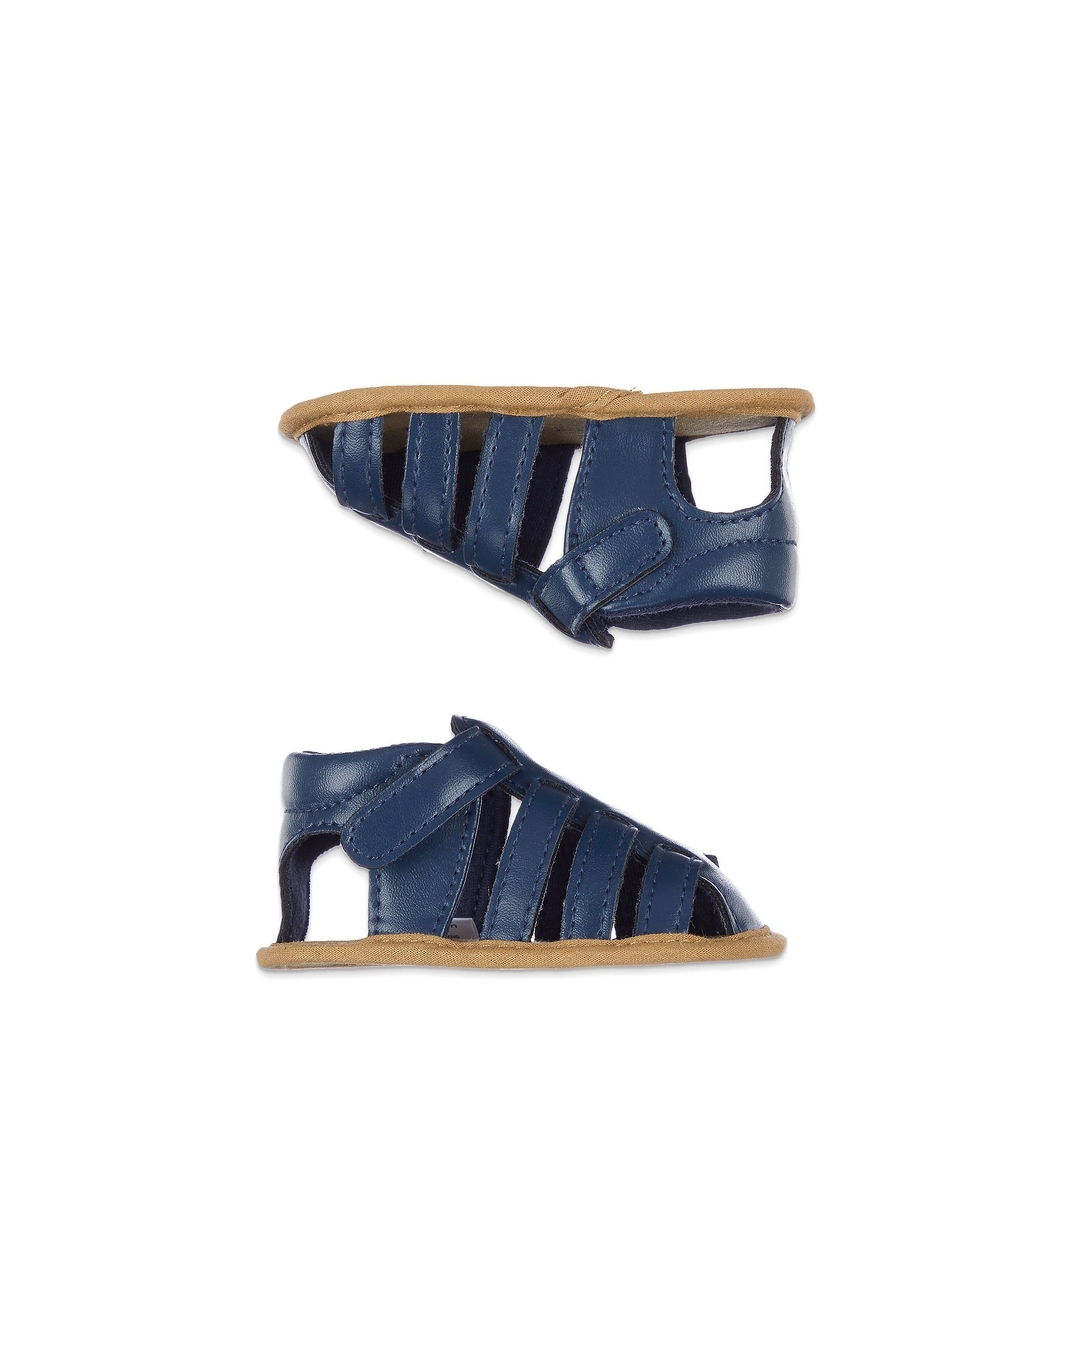 1-3 Years Old Boys Sandals/Toddler Sandals | Shopee Philippines-tmf.edu.vn